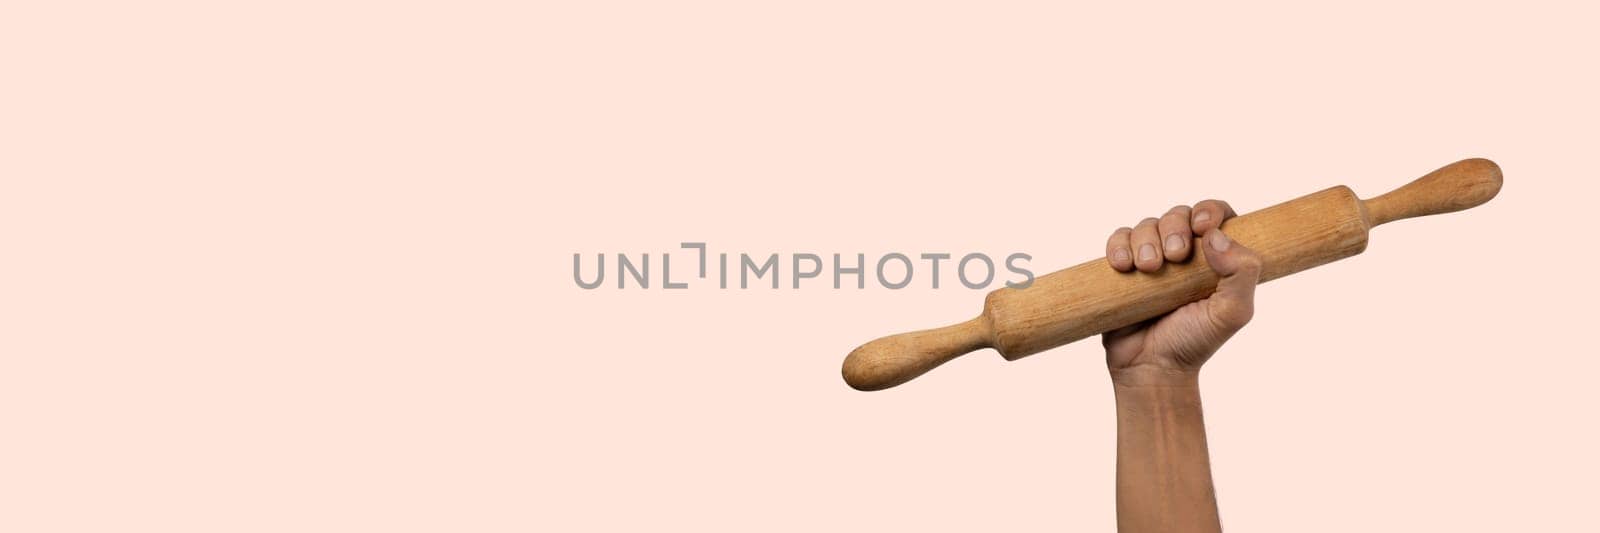 Hand holding a wooden rolling pin isolated on light pink banner background by TropicalNinjaStudio